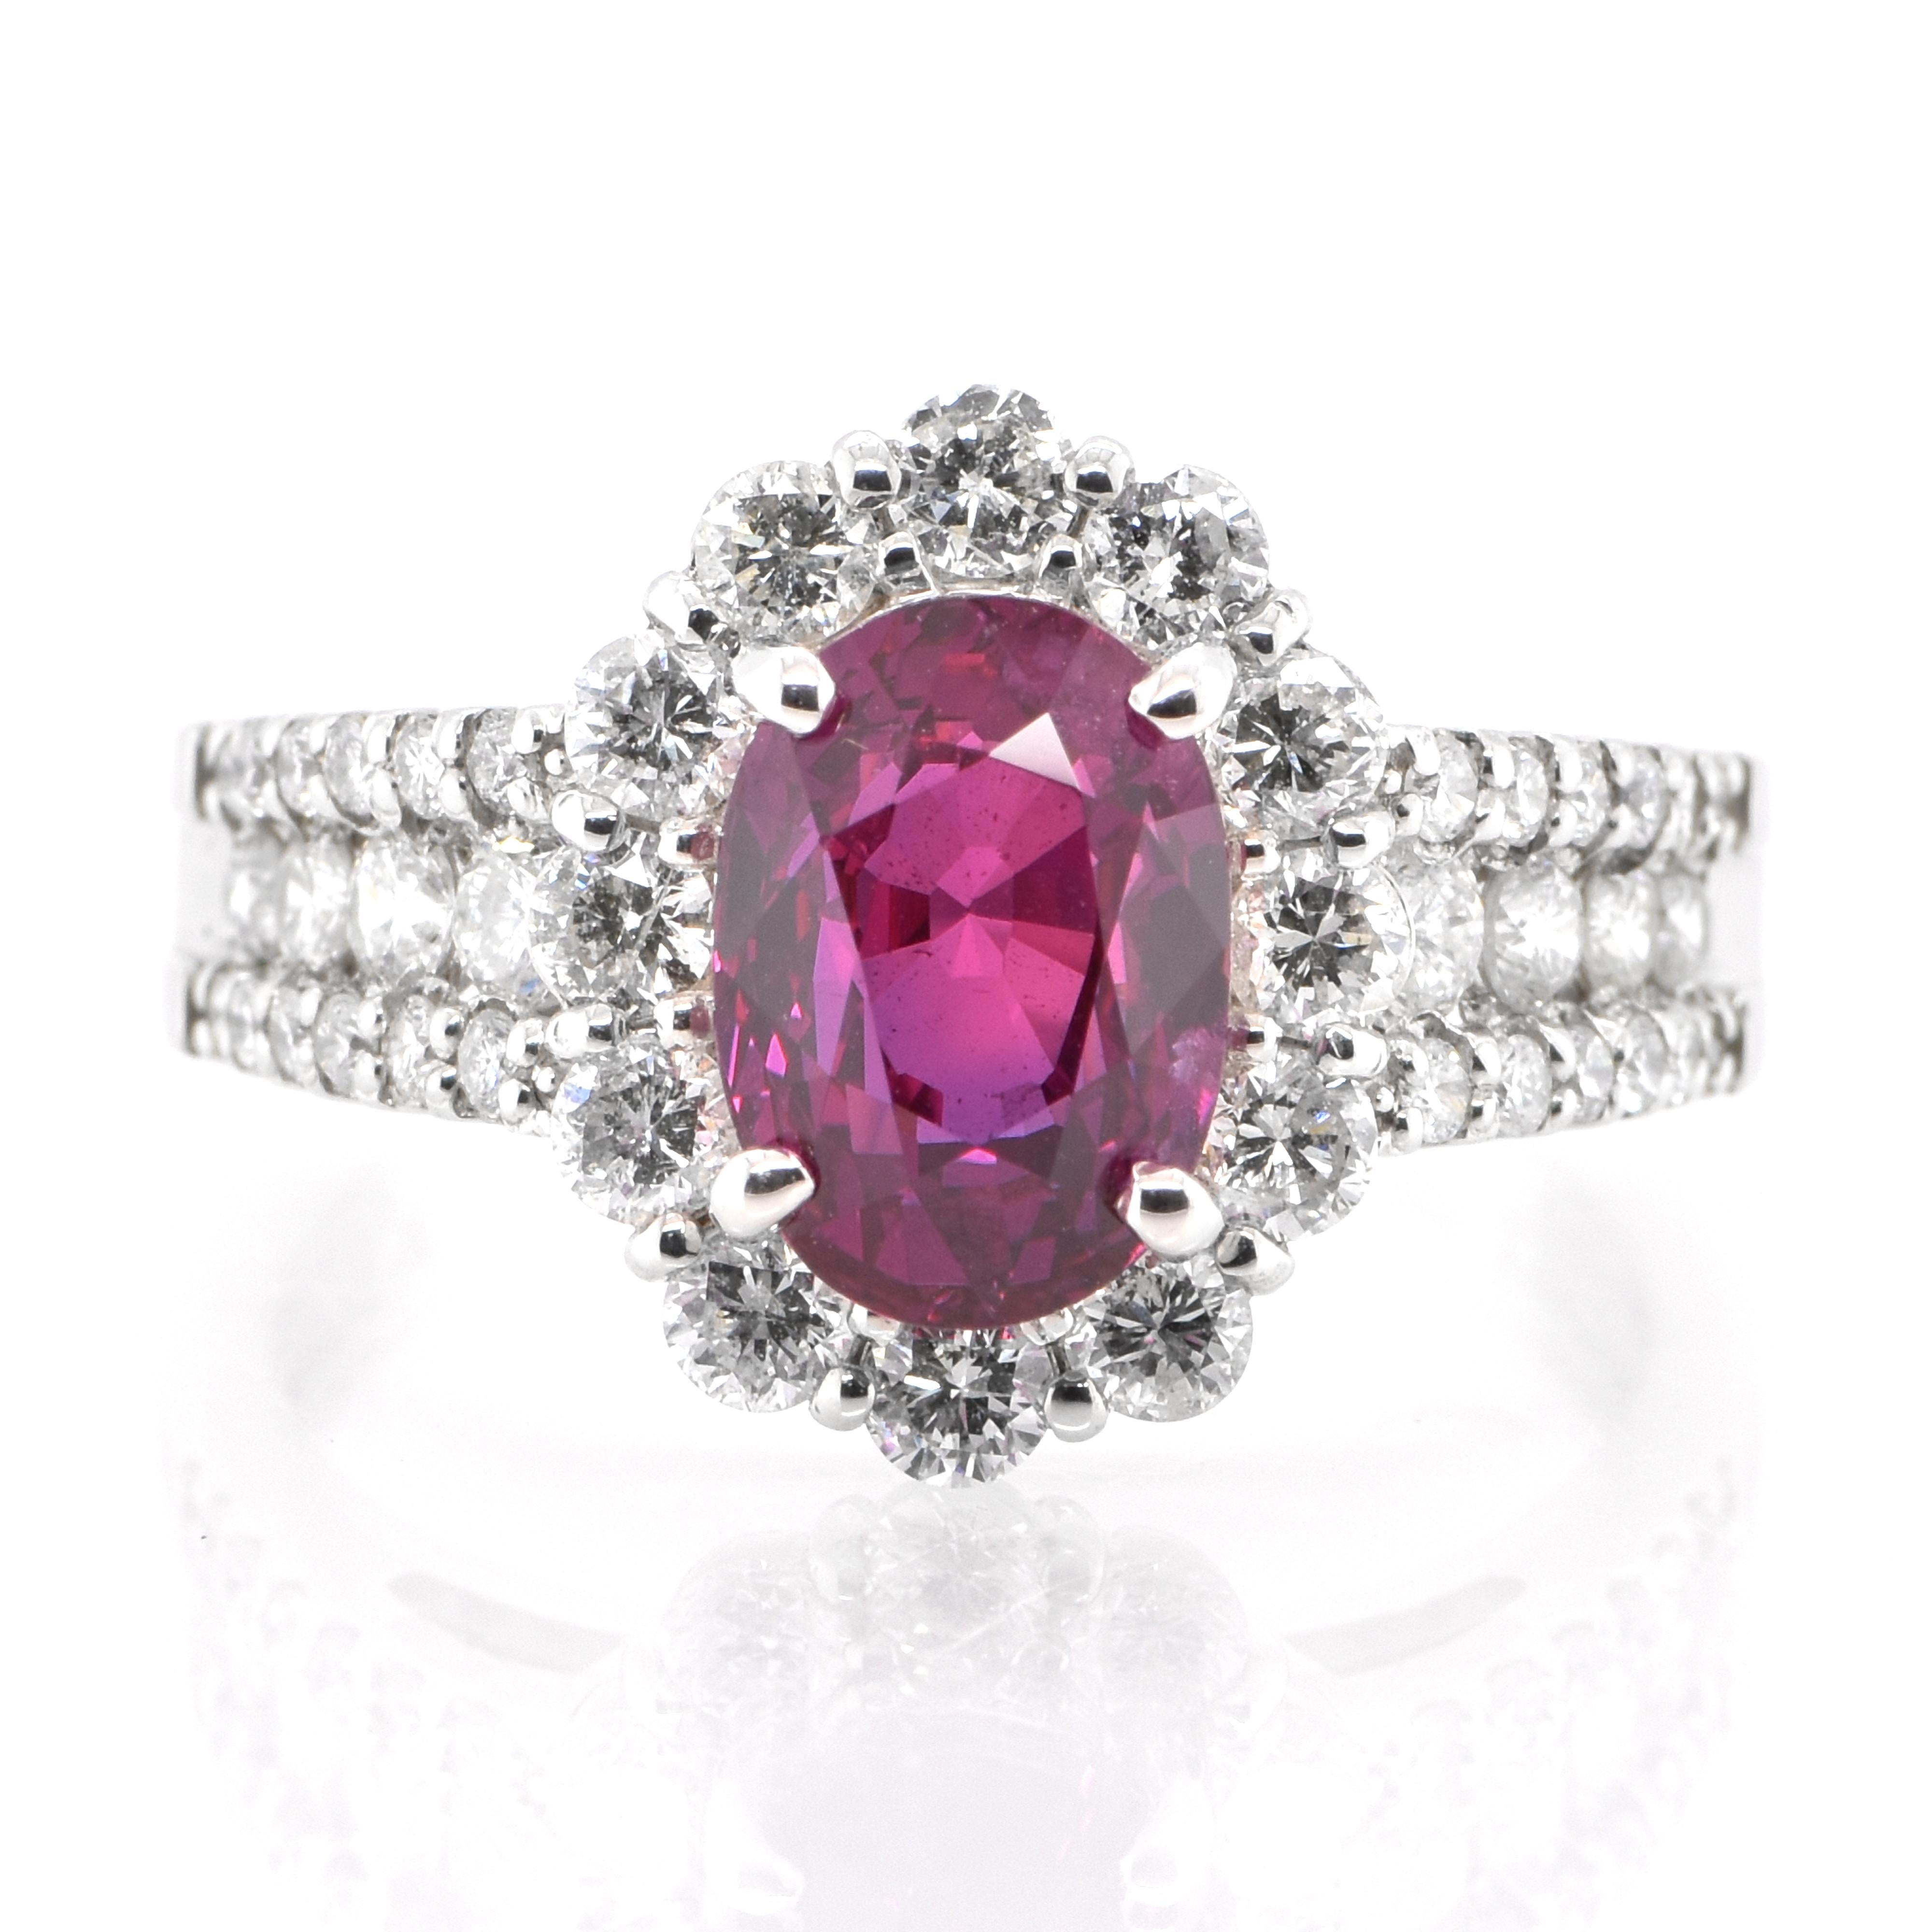 A beautiful ring set in Platinum featuring a GIA Certified 2.69 Carat Natural Untreated (No Heat), Mozambican Ruby and 0.95 Carat Diamonds. Rubies are referred to as 